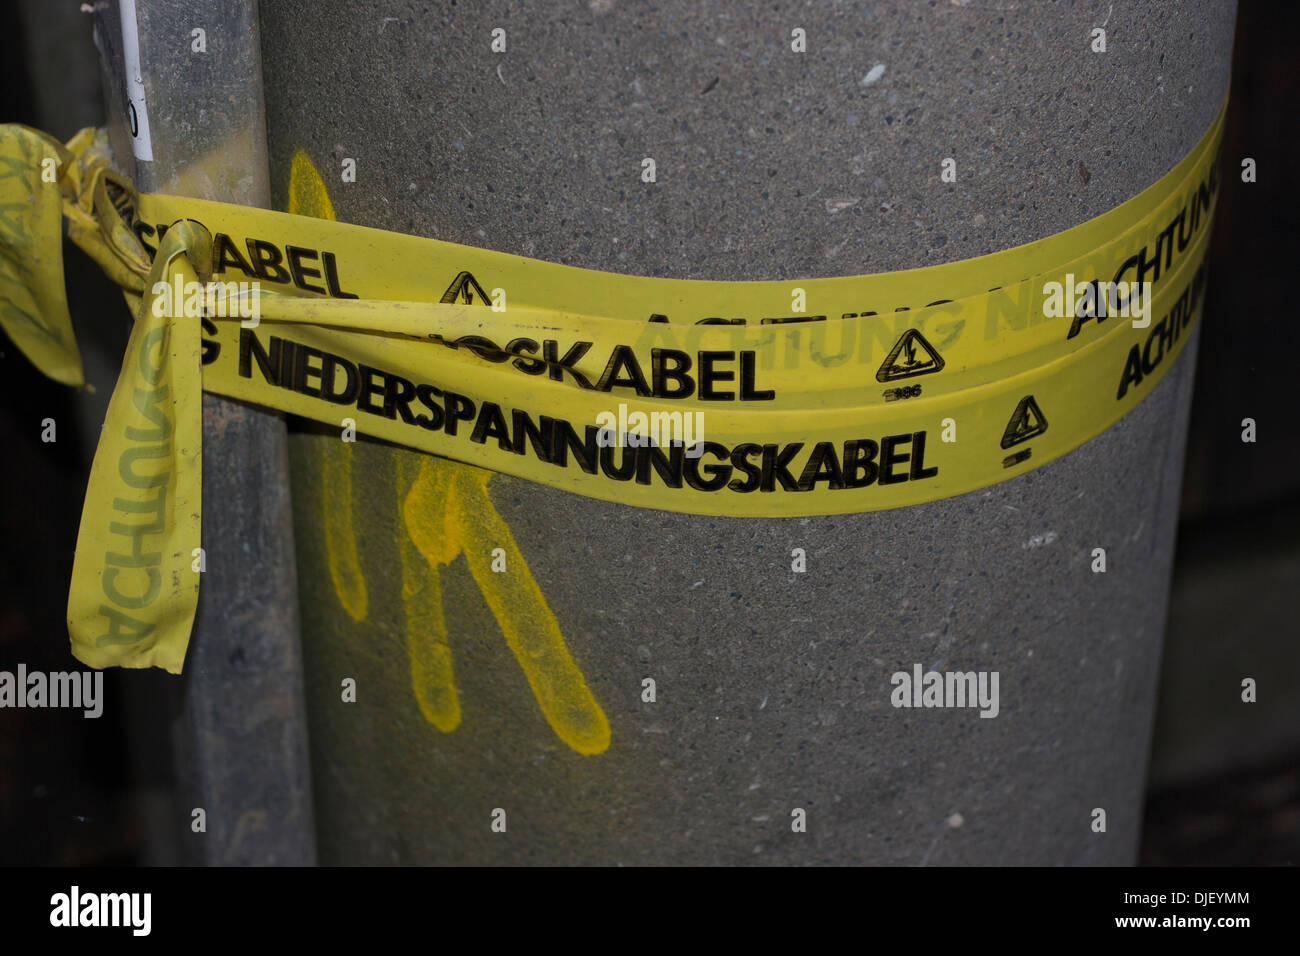 Yellow Tape Warning Achtung Niederspannungskabel Germany Stock Photo